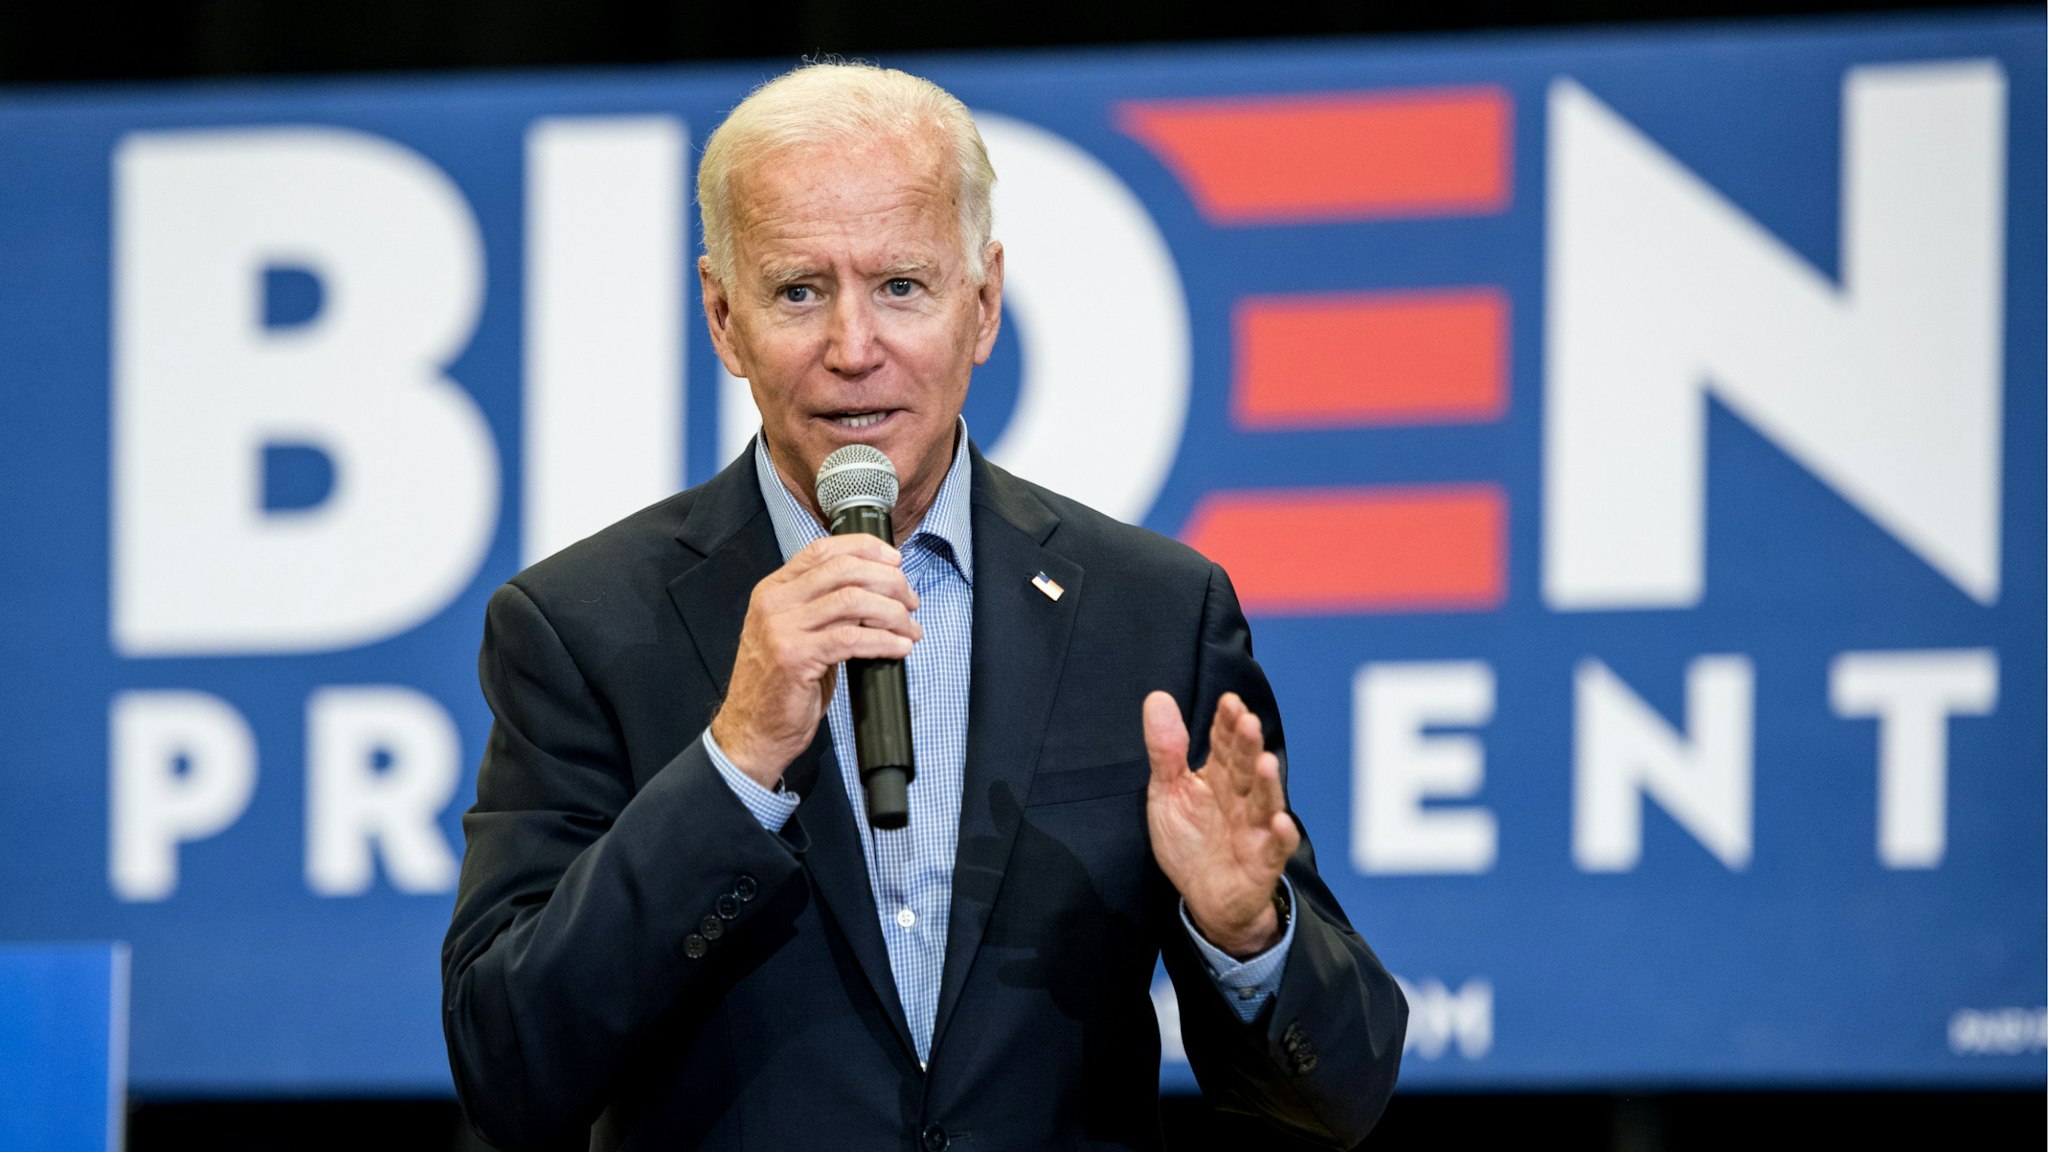 Democratic presidential candidate and former US Vice President Joe Biden addresses a crowd at a town hall event at Clinton College on August 29, 2019 in Rock Hill, South Carolina.